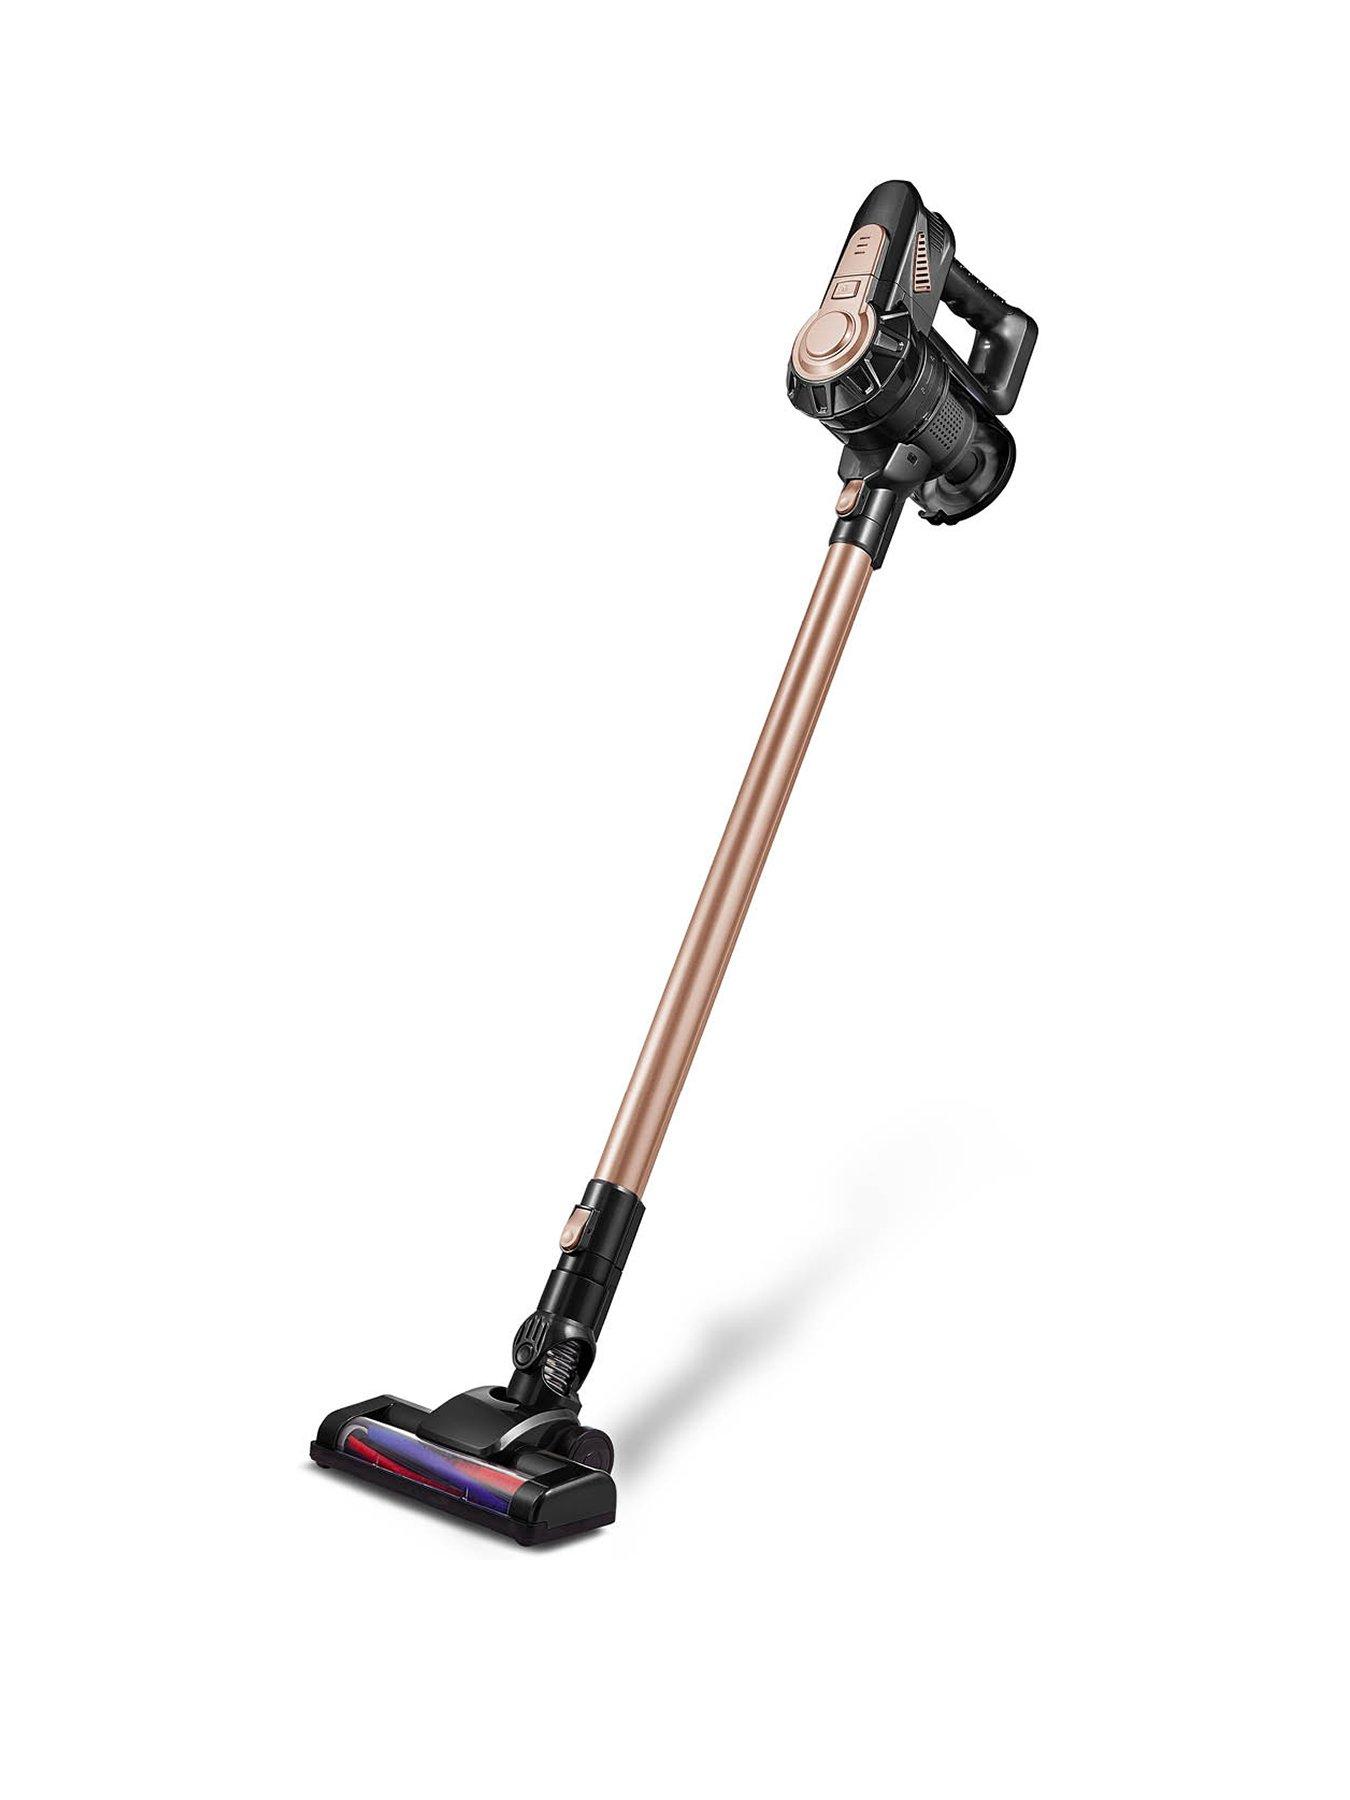 Rose Gold Ultra Lightweight Portable Tower RVL30 Cordless Upright Vacuum Cleaner 120 W 3-in-1 600 ml Capacity 45 Minute Runtime HEPA Filter 22.2V